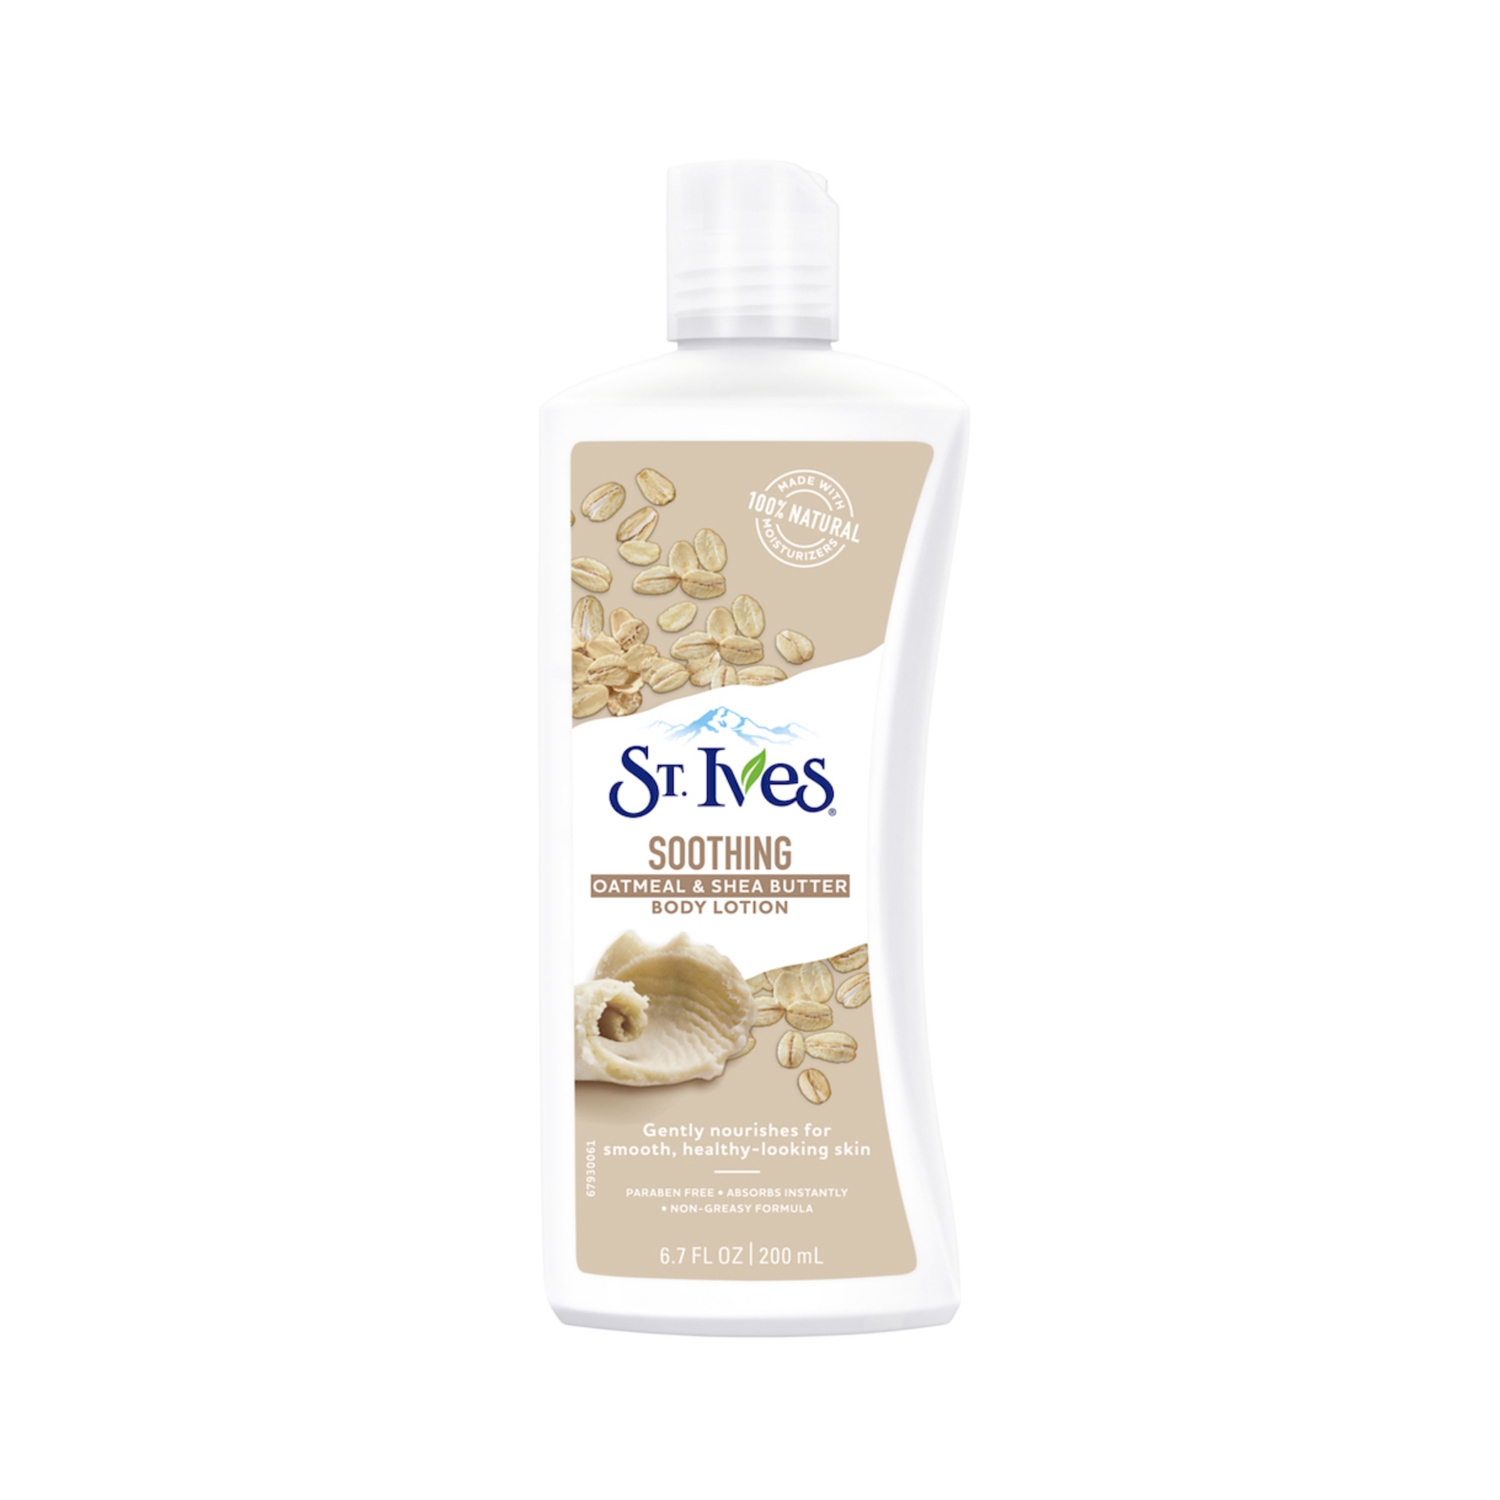 St. Ives | St. Ives Soothing Oatmeal & Shea Butter Body Lotion (200ml)